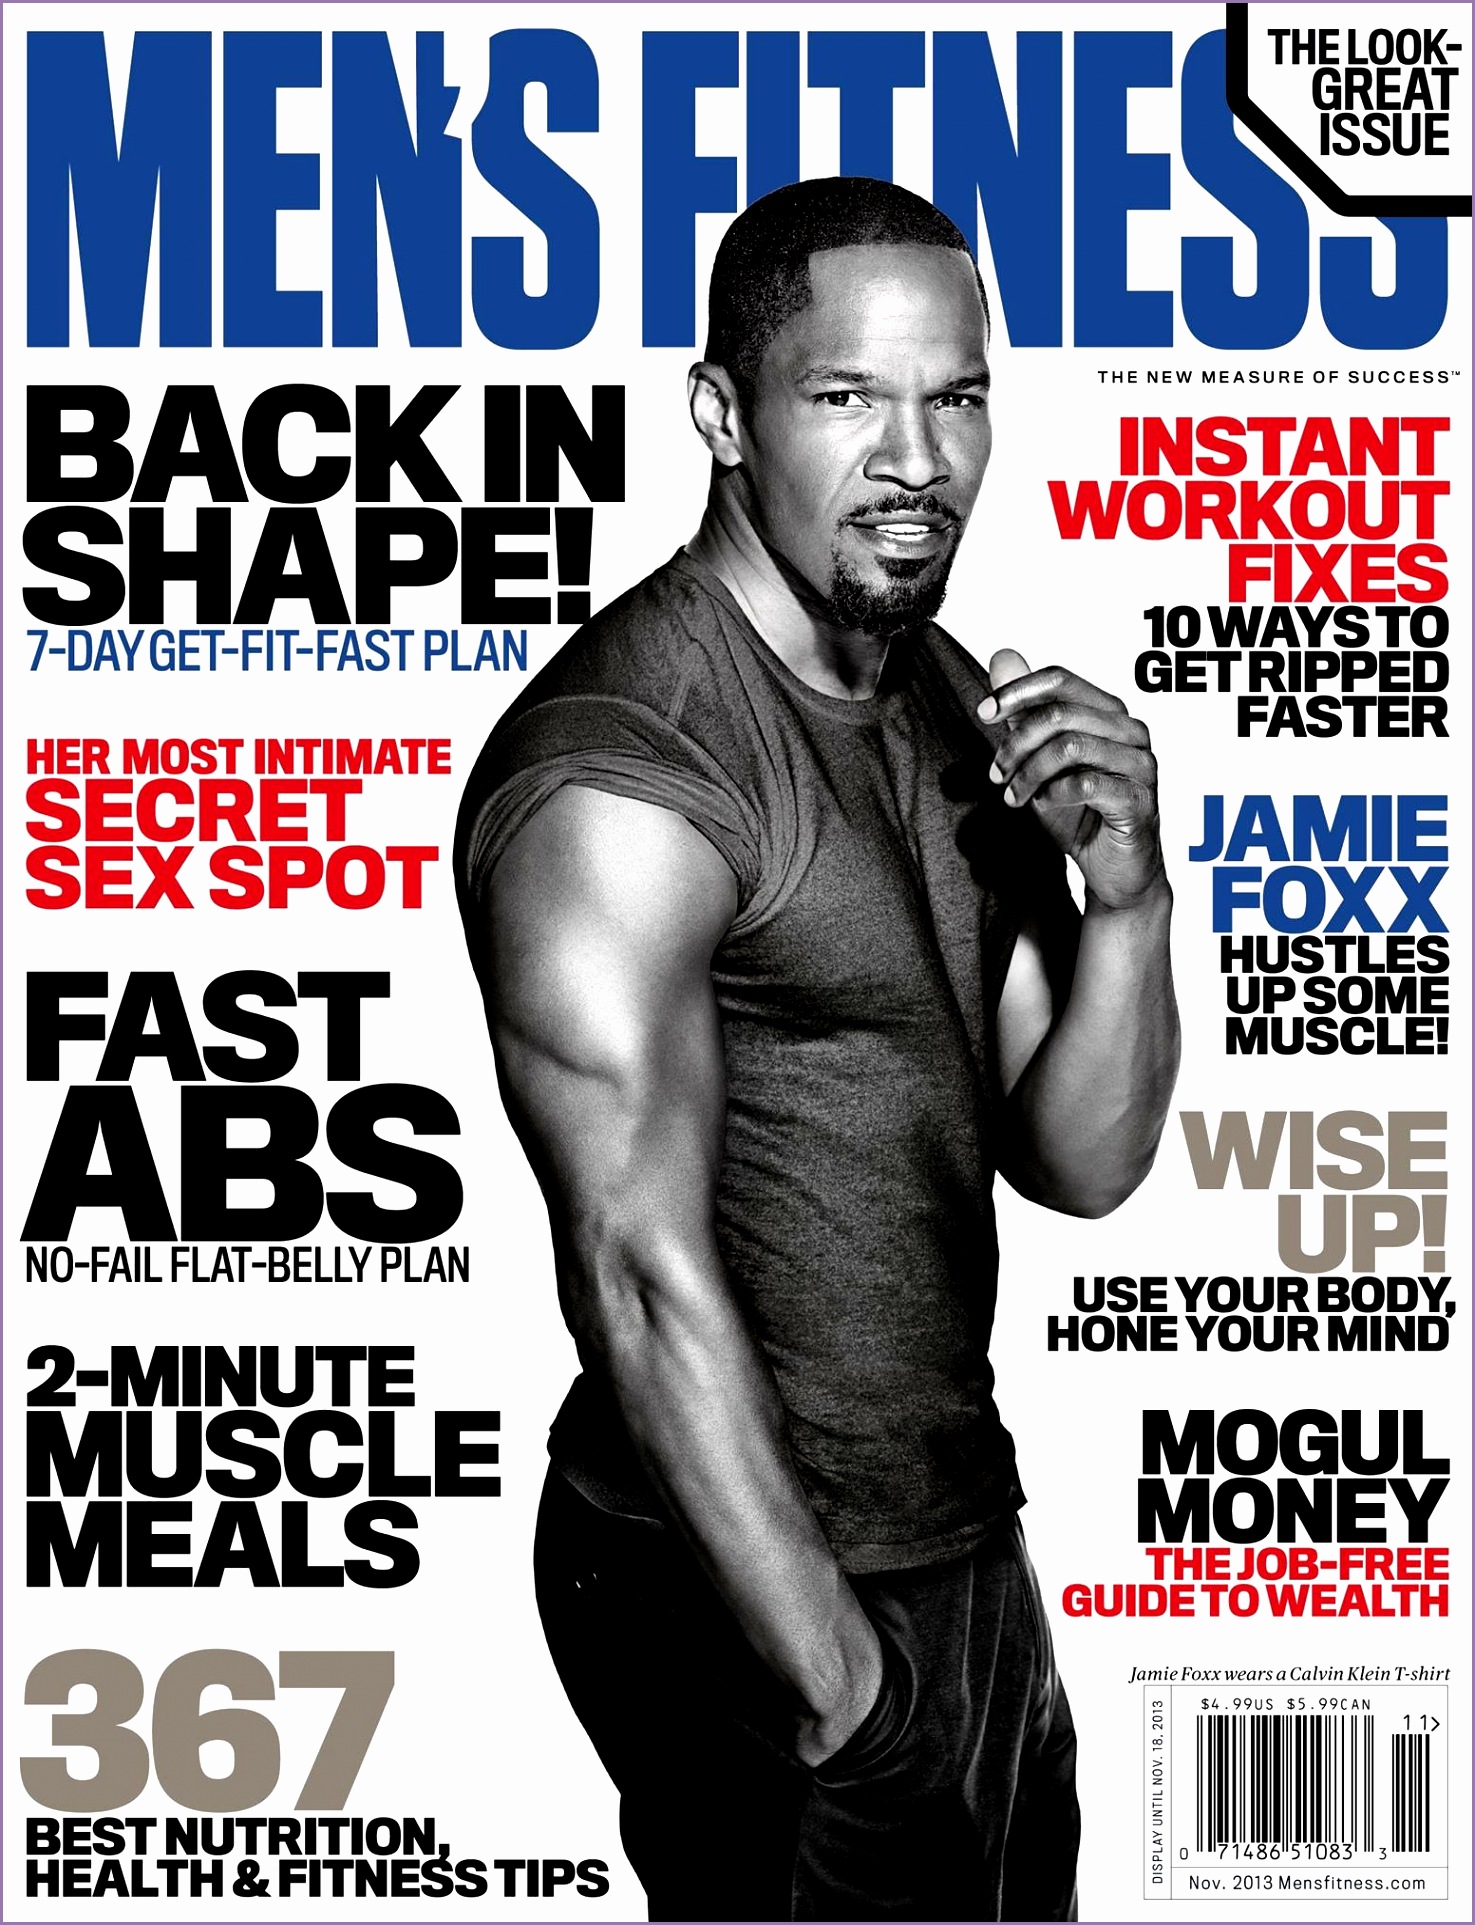 jamie foxx covers mens fitness reportedly dating katie holmes